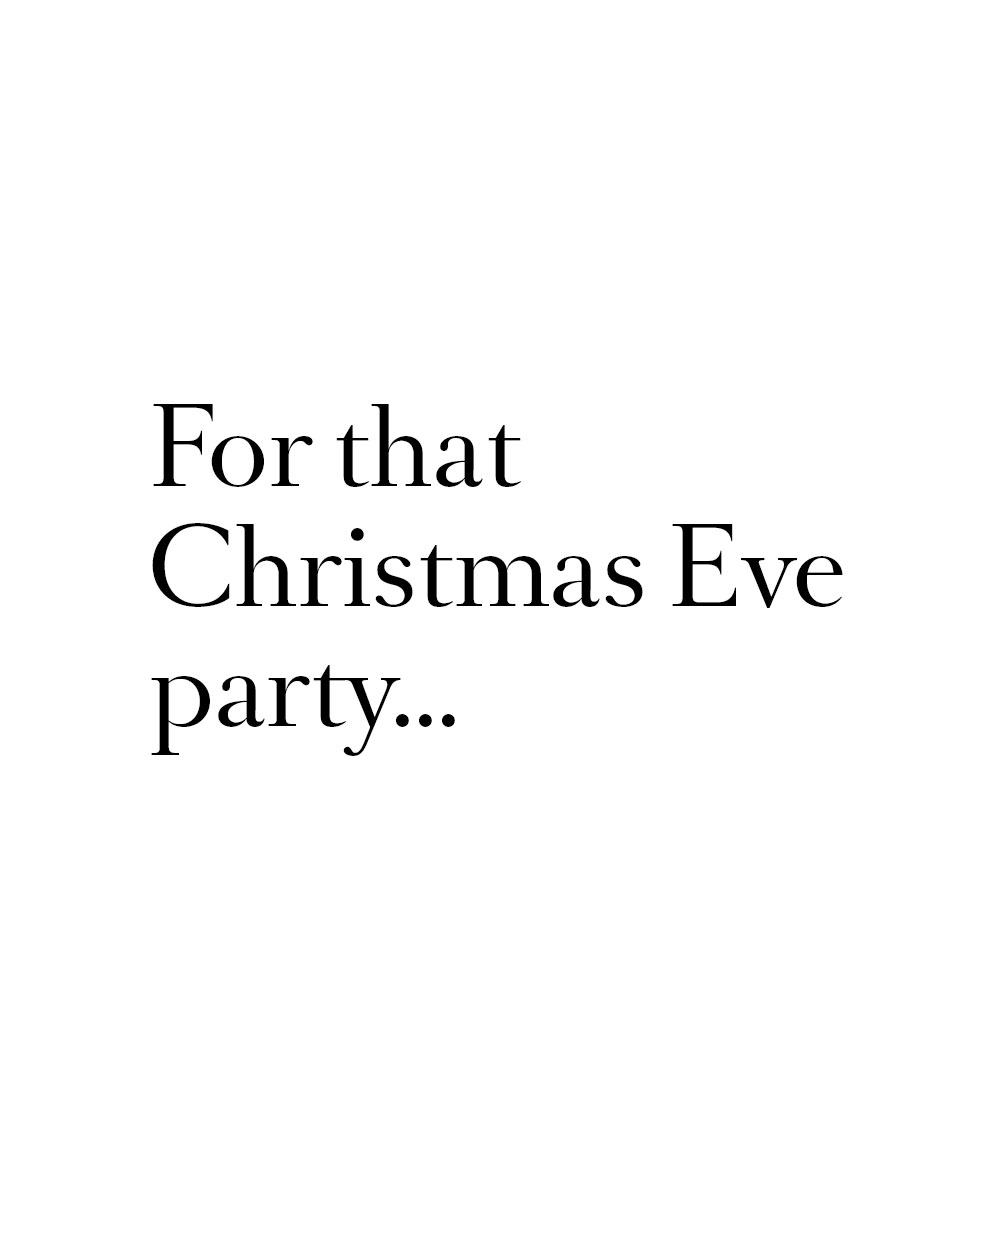 For that Christmas Eve party...